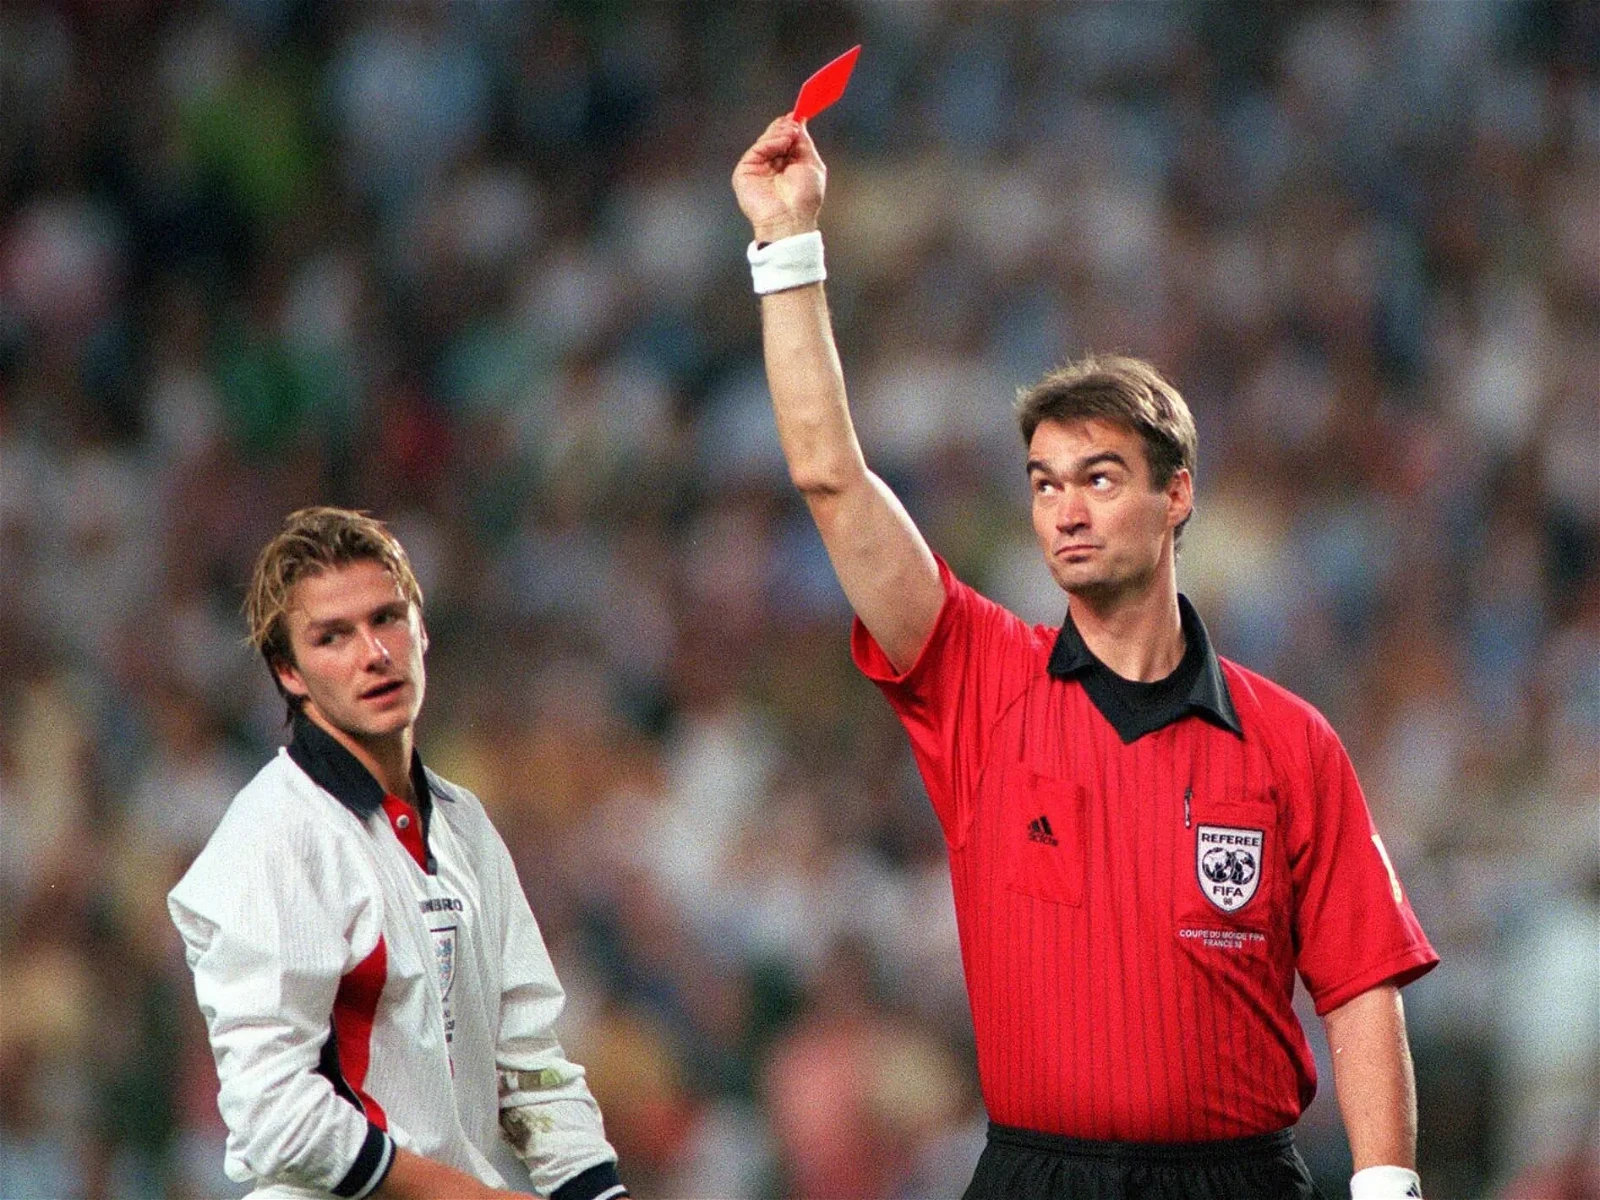 David Beckham receiving the infamous red card in the 1998 FIFA World Cup